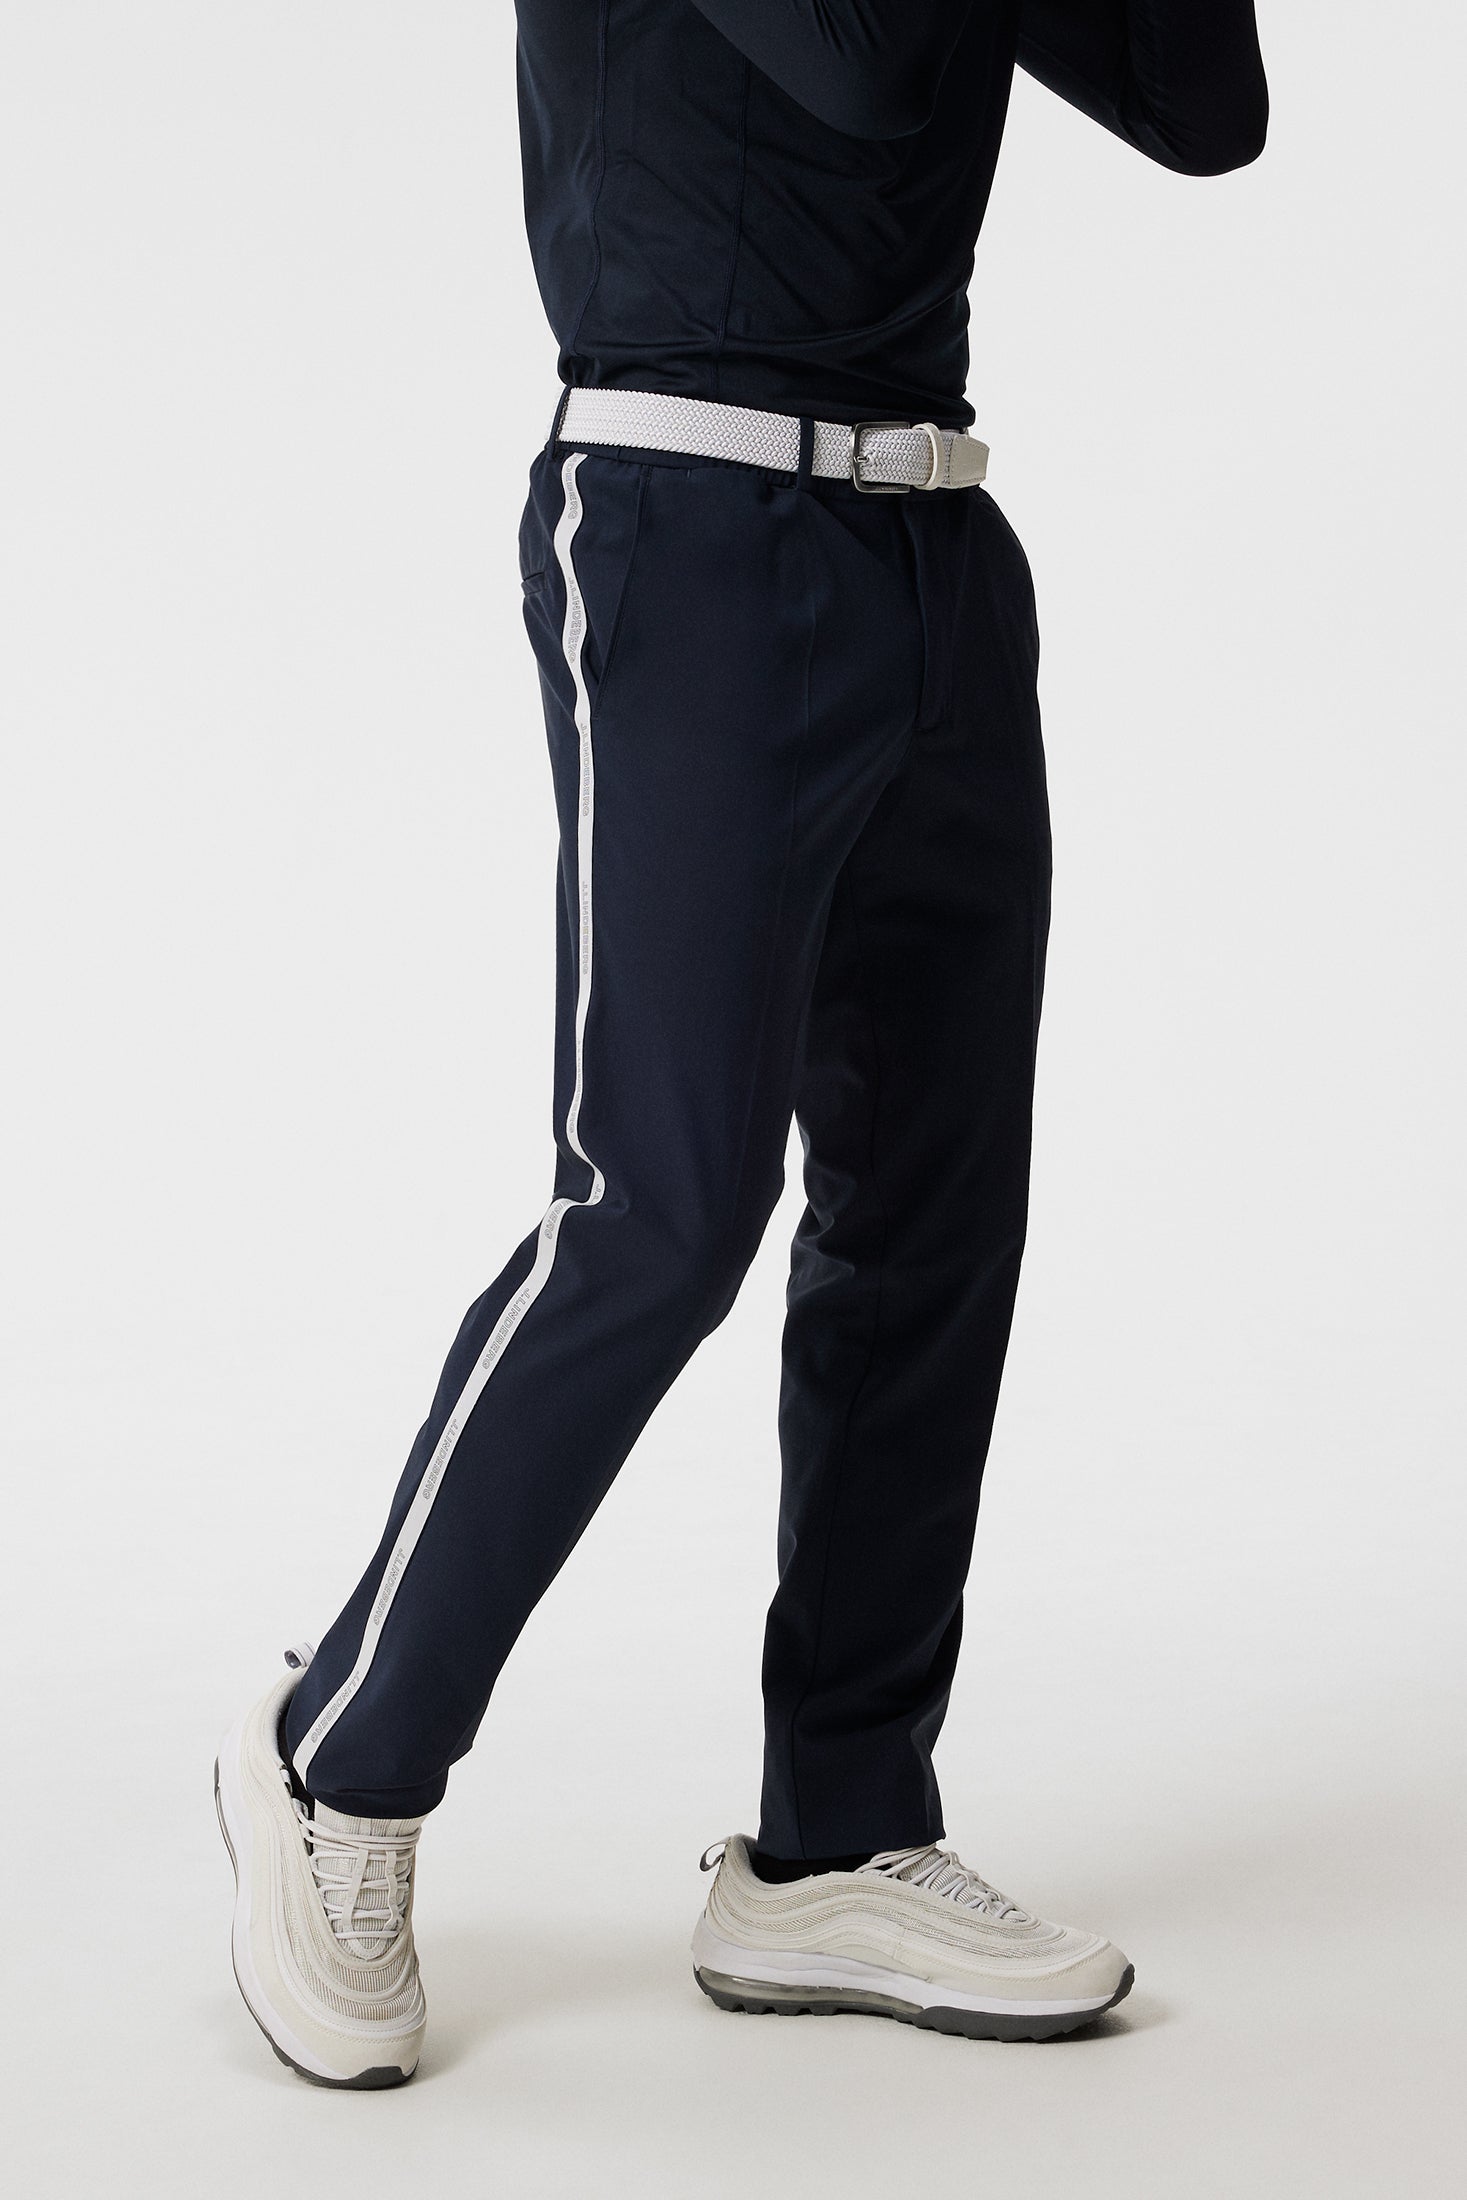 Barristers Court Stripe Pant